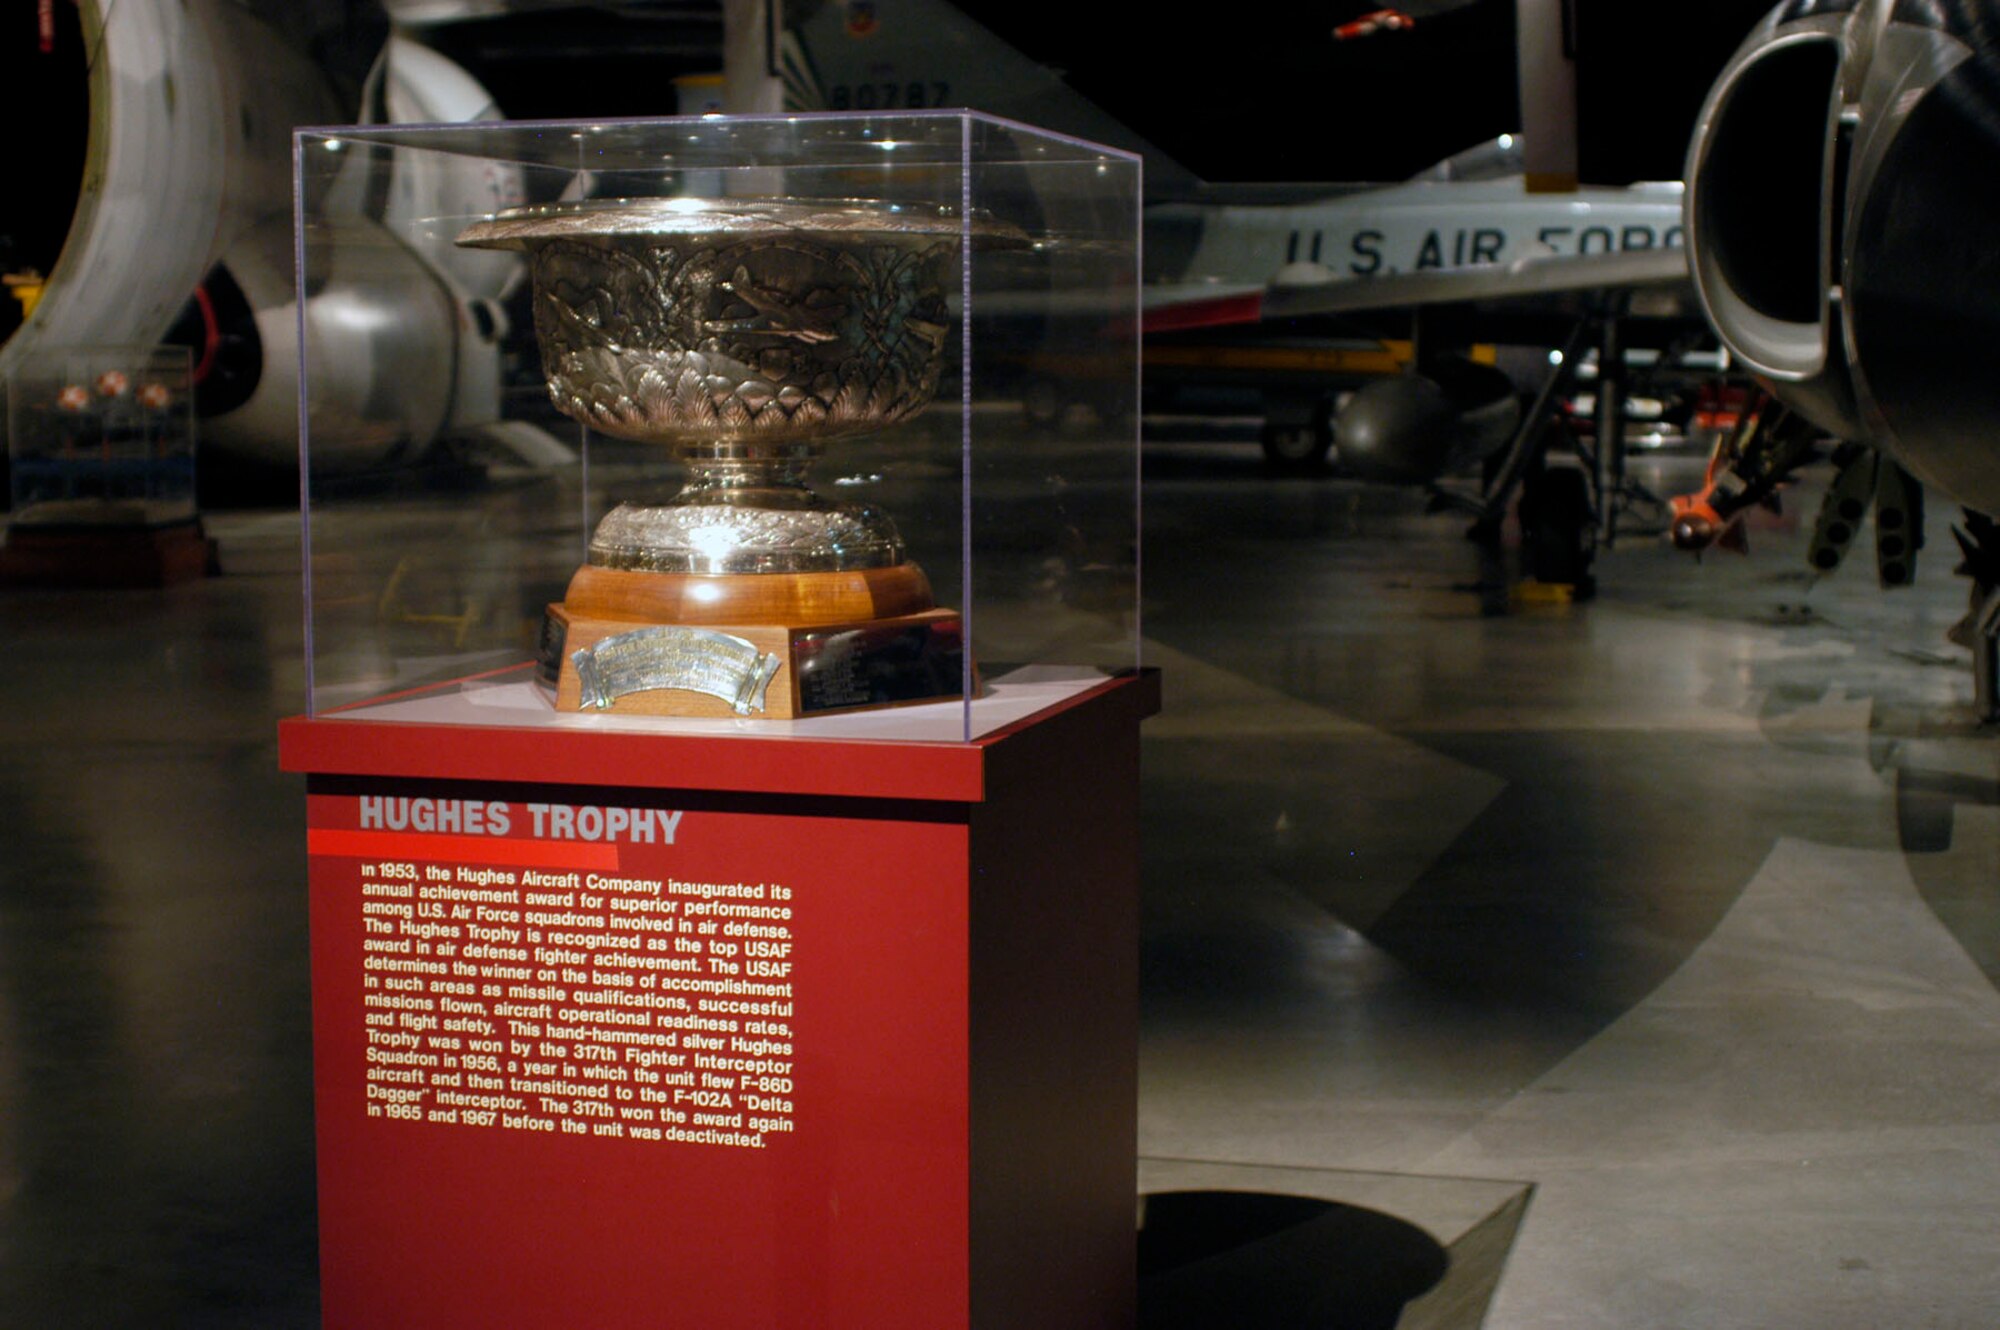 DAYTON, Ohio -- 1956 Hughes Trophy on display in the Cold War Gallery at the National Museum of the United States Air Force. (U.S. Air Force photo)